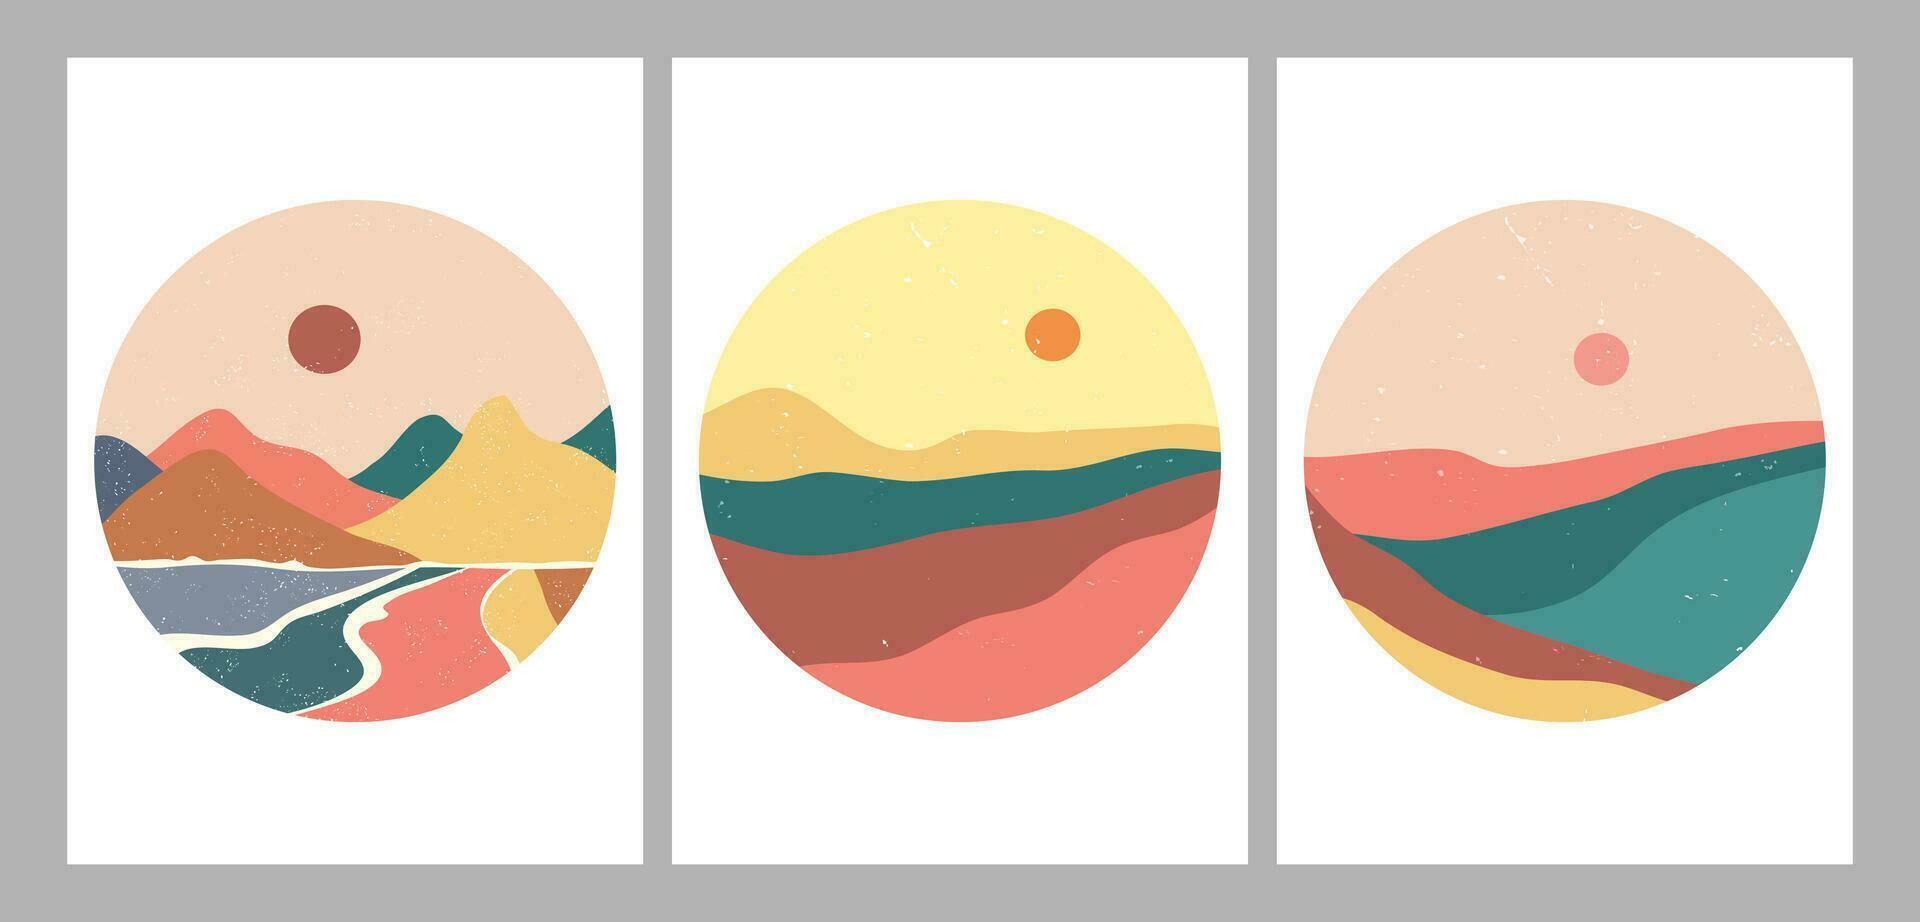 Set of Round Mountains logo. Round logo for stickers, poster logos, card. Minimalist style landscape illustrations of Mid century modern art with river, hills, wave vector